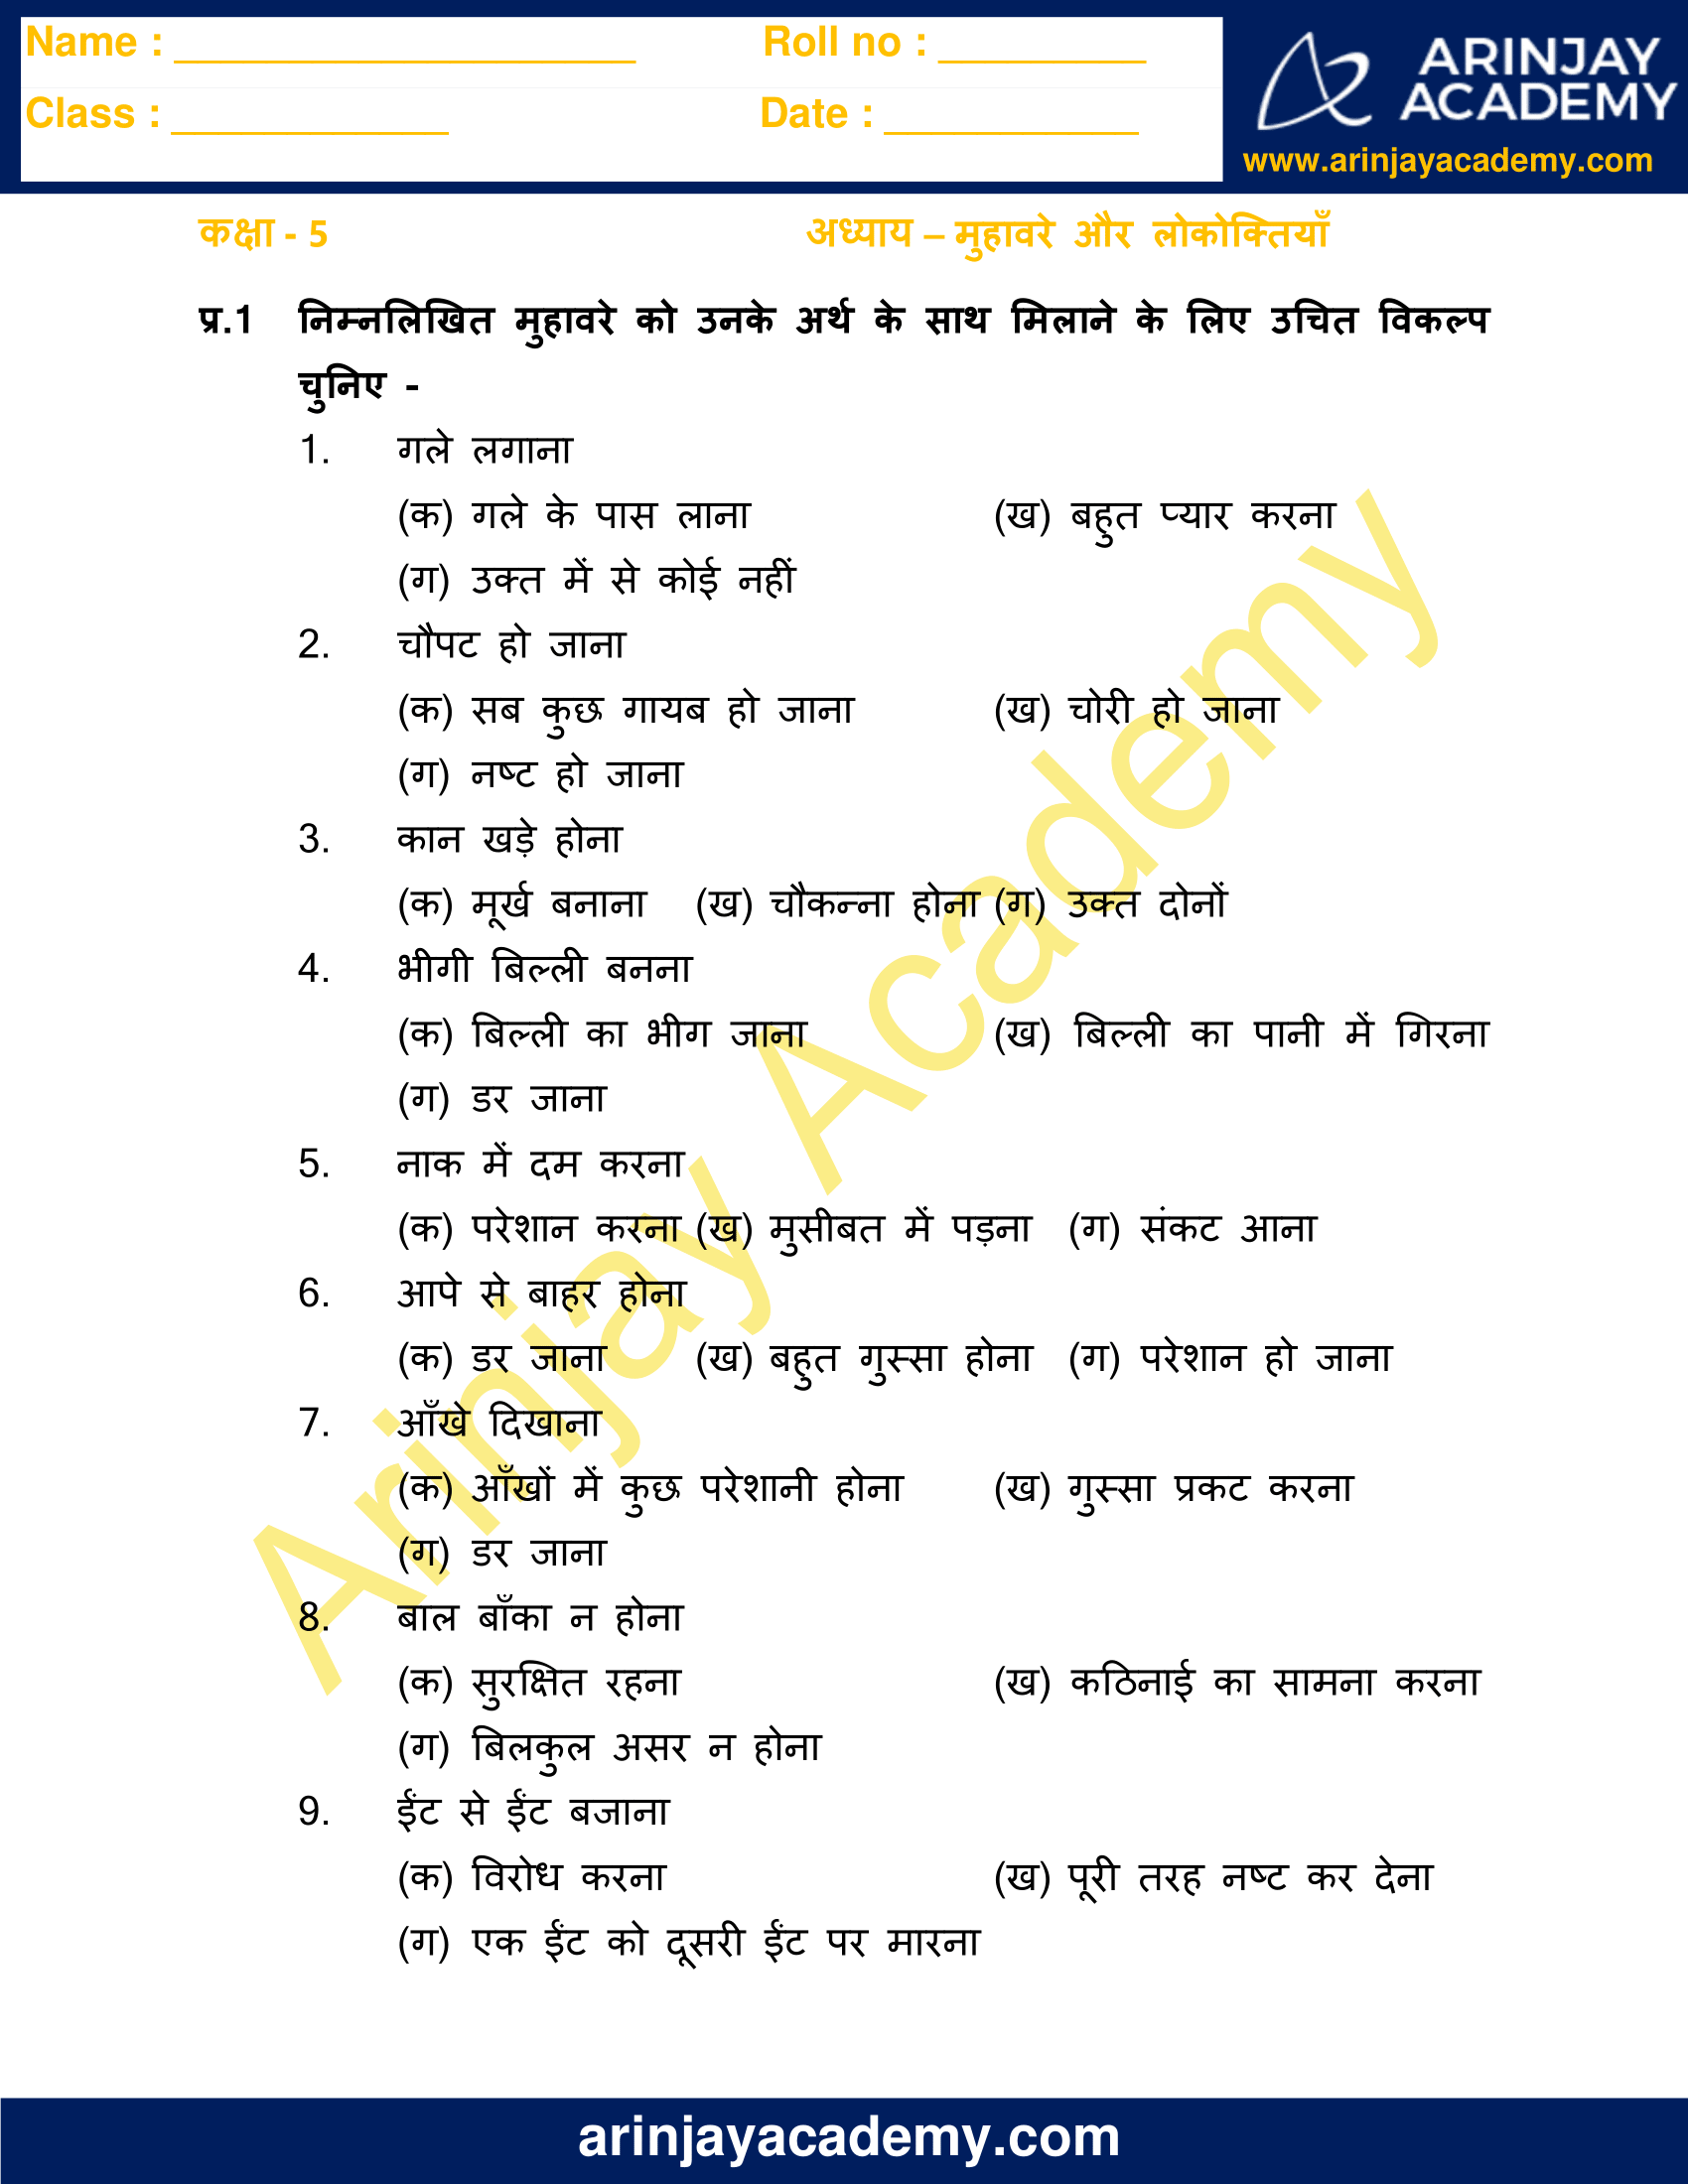 Muhavare in Hindi for Class 5 - Free and Printable - Arinjay Academy